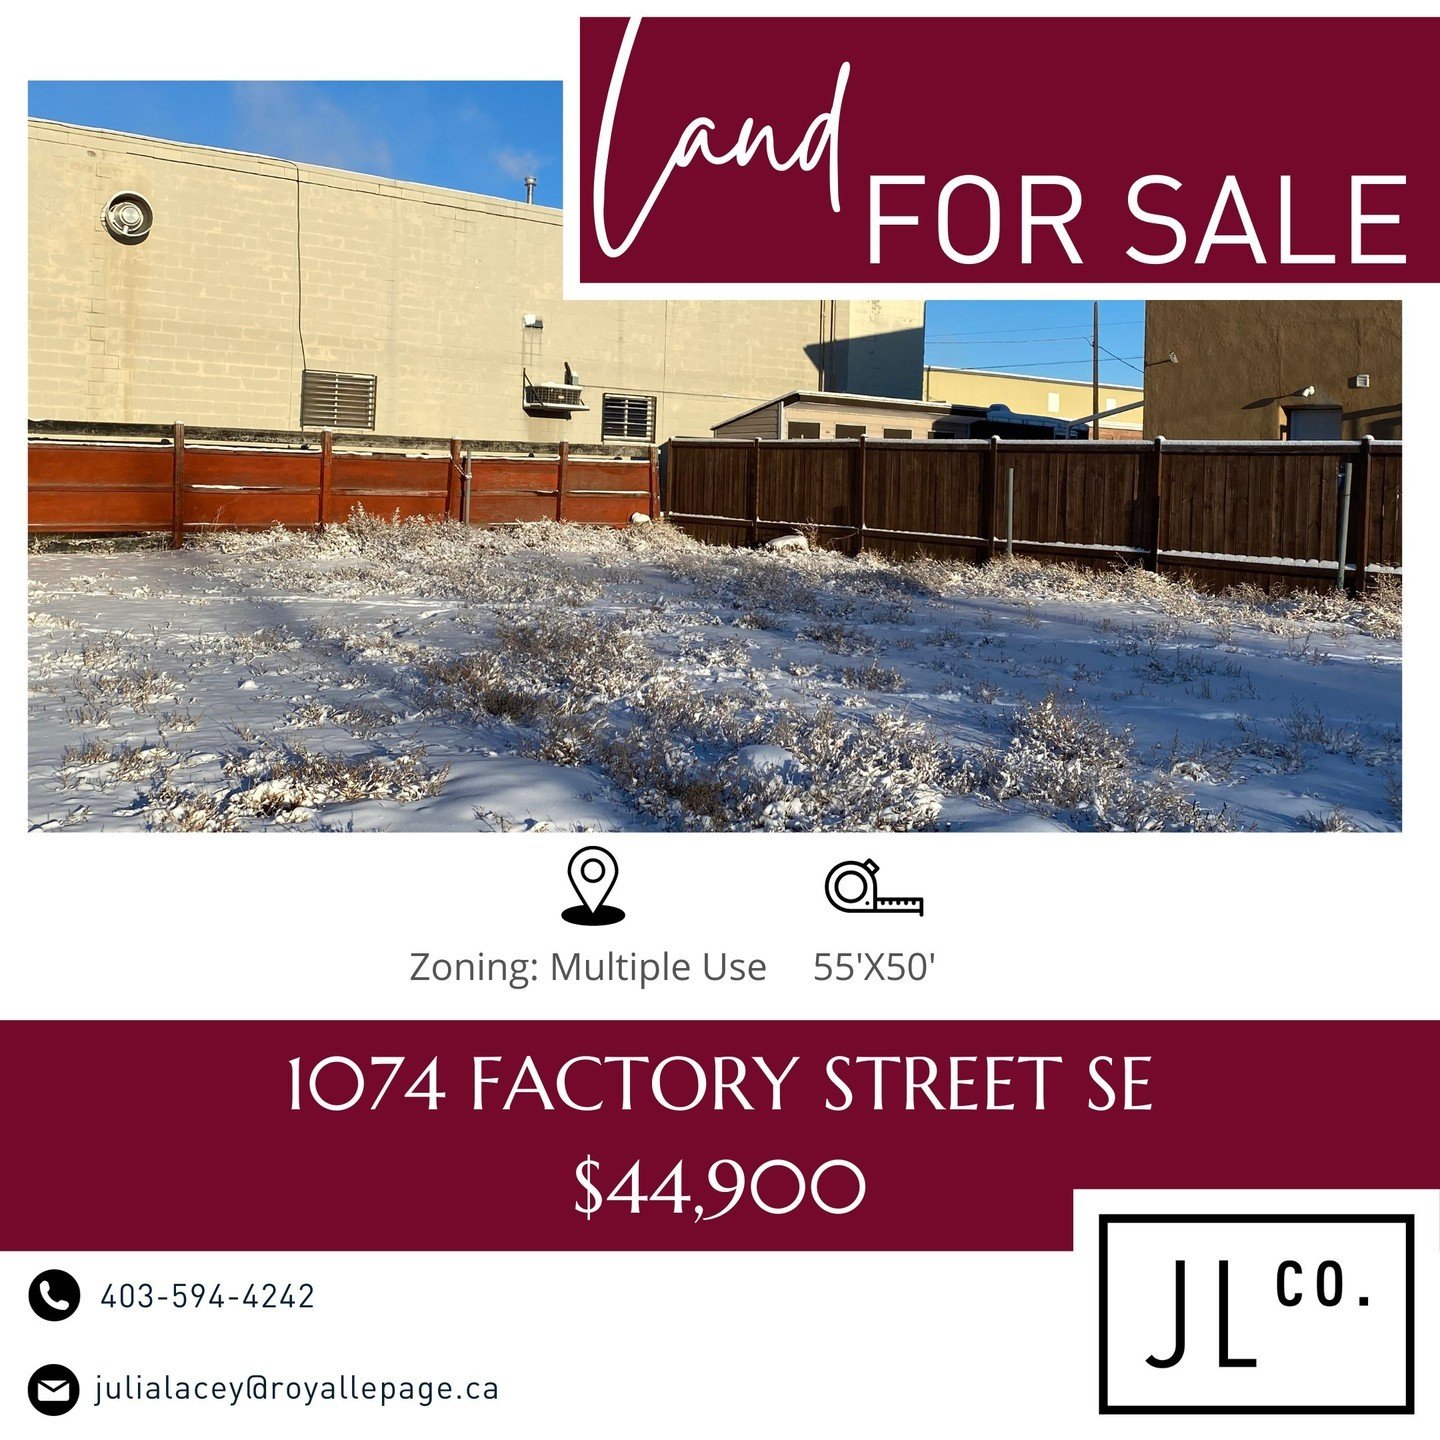 ✨ Mixed-Use Land for Sale! 

1074 Factory Street SE
$44,900
A2081972

Seize the opportunity to own a 55x50 piece of land with endless possibilities! 
Explore a diverse range of options:

🛒 Retail &amp; consumer services
🏗️ Shop
🏥 Health care facil